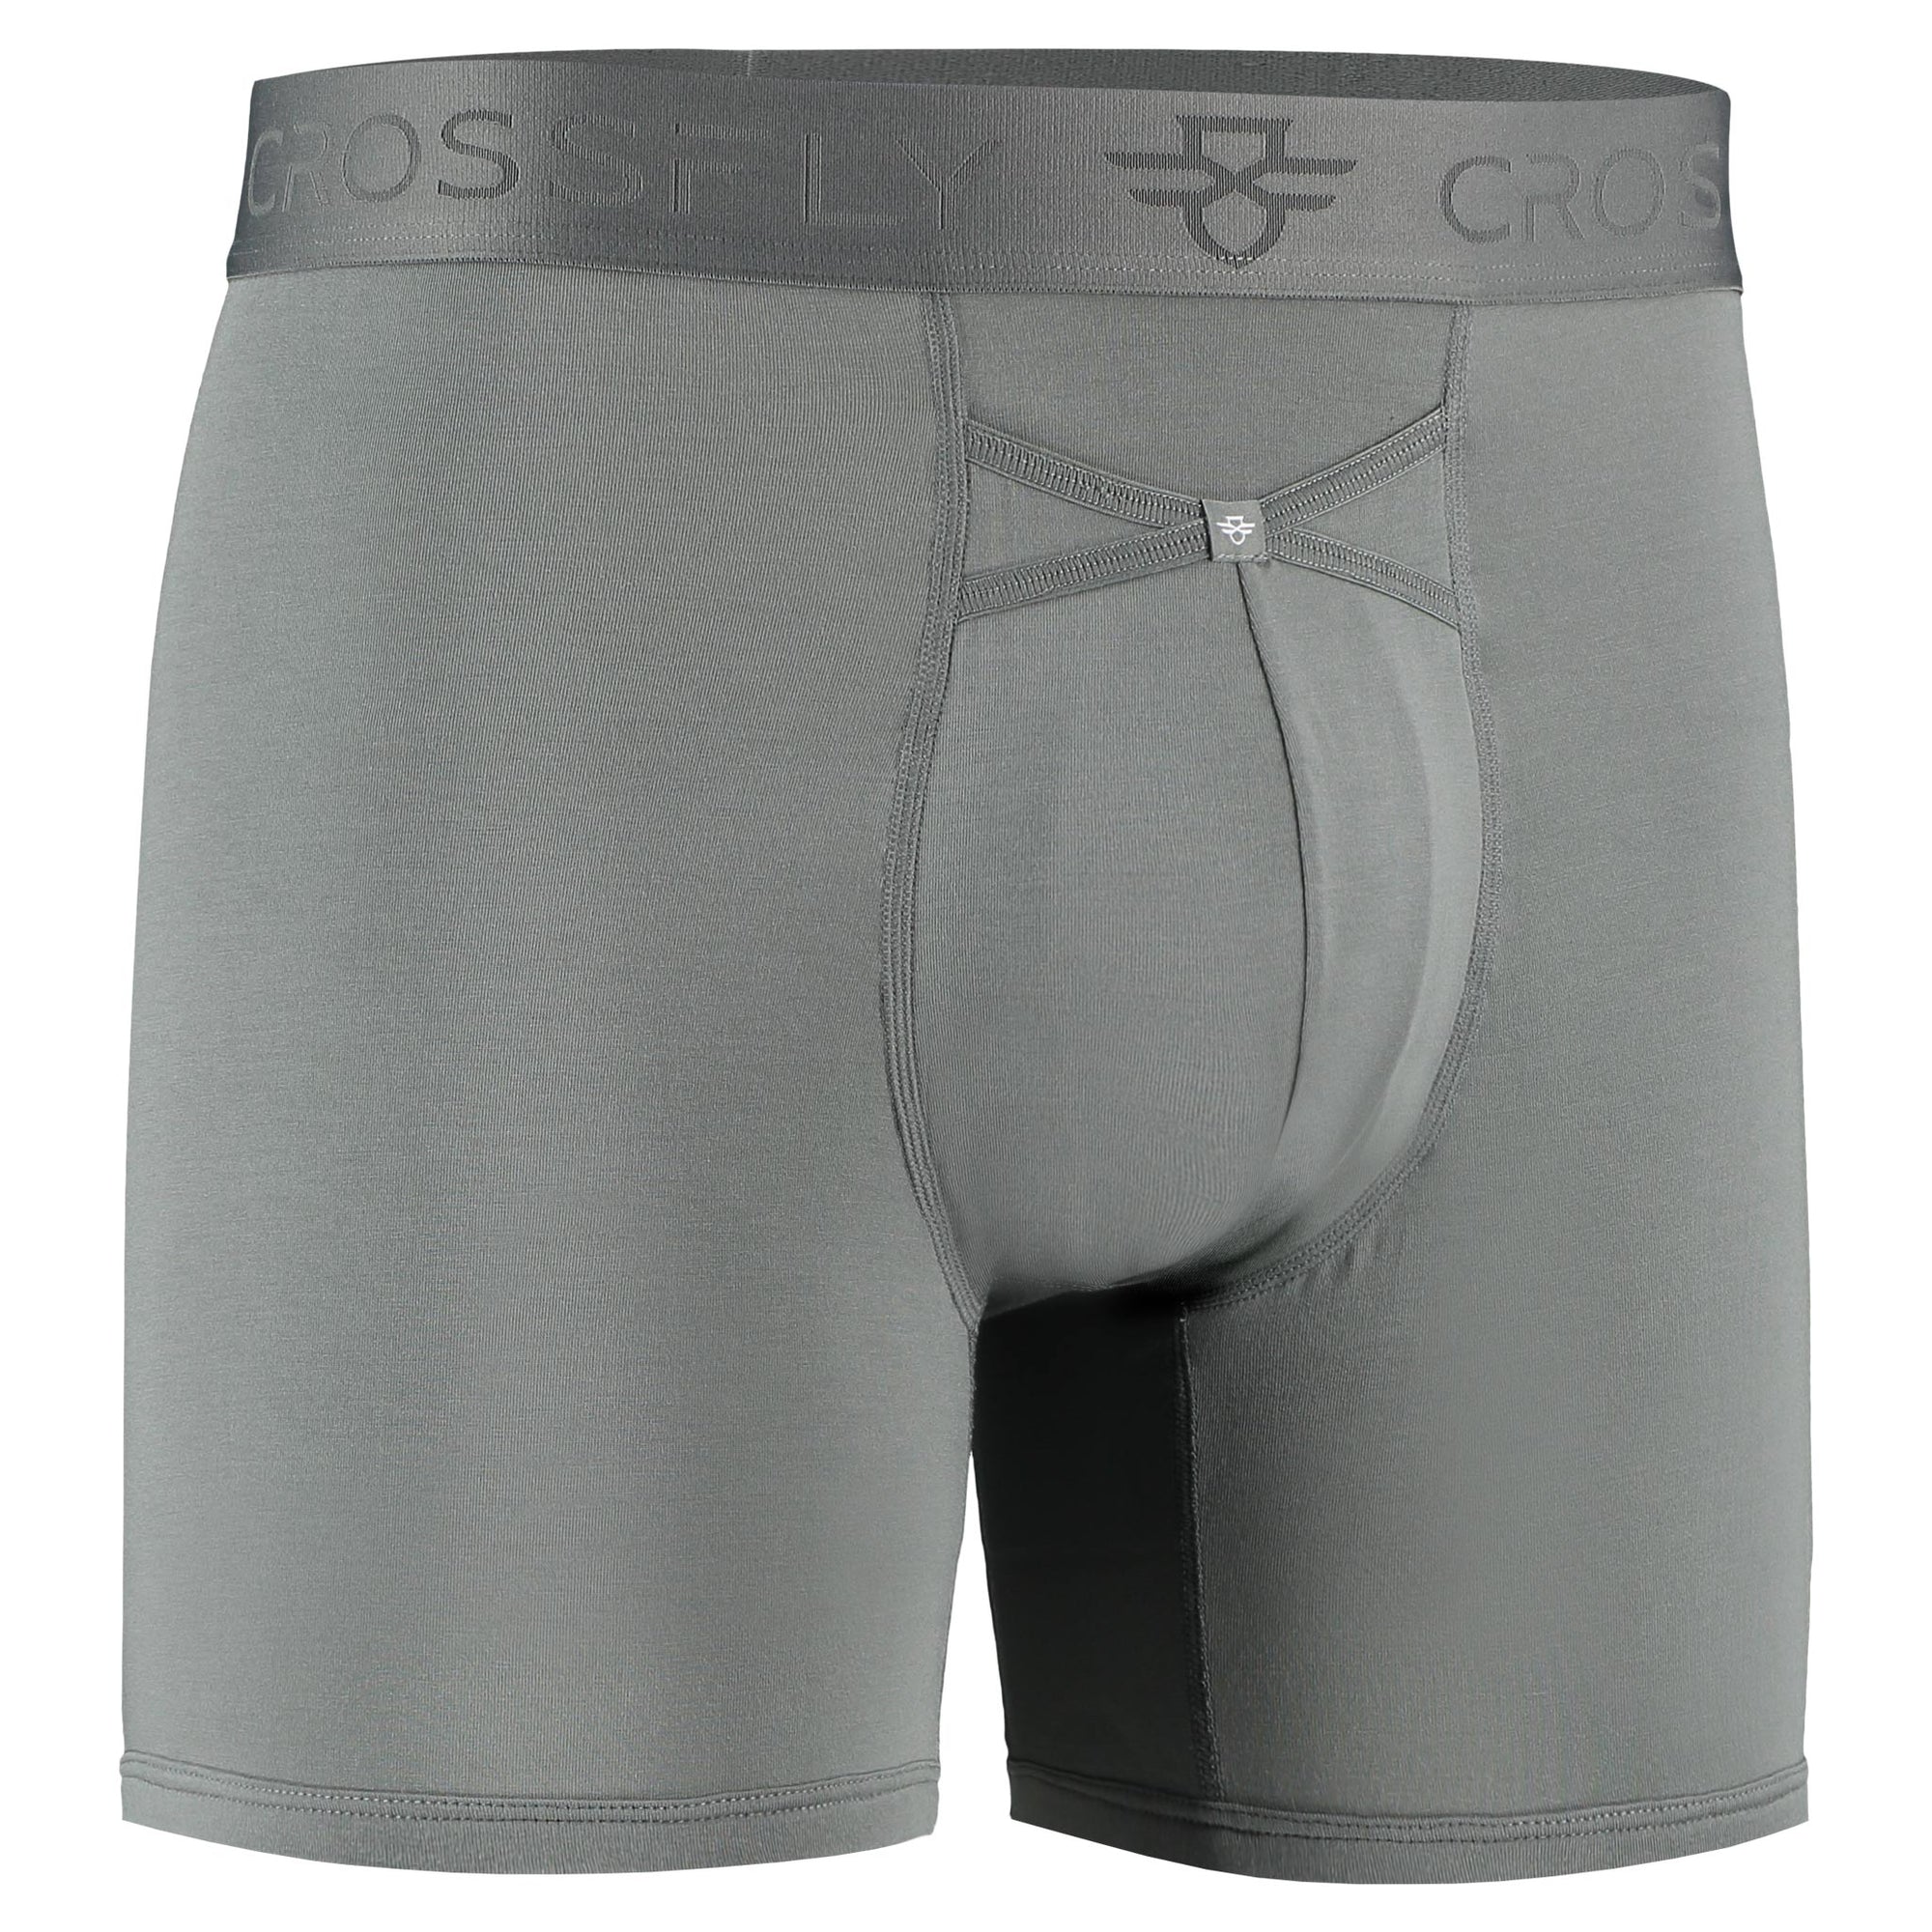 Crossfly men's IKON 6" charcoal boxers from the Everyday series, featuring X-Fly and Coccoon internal pocket support.